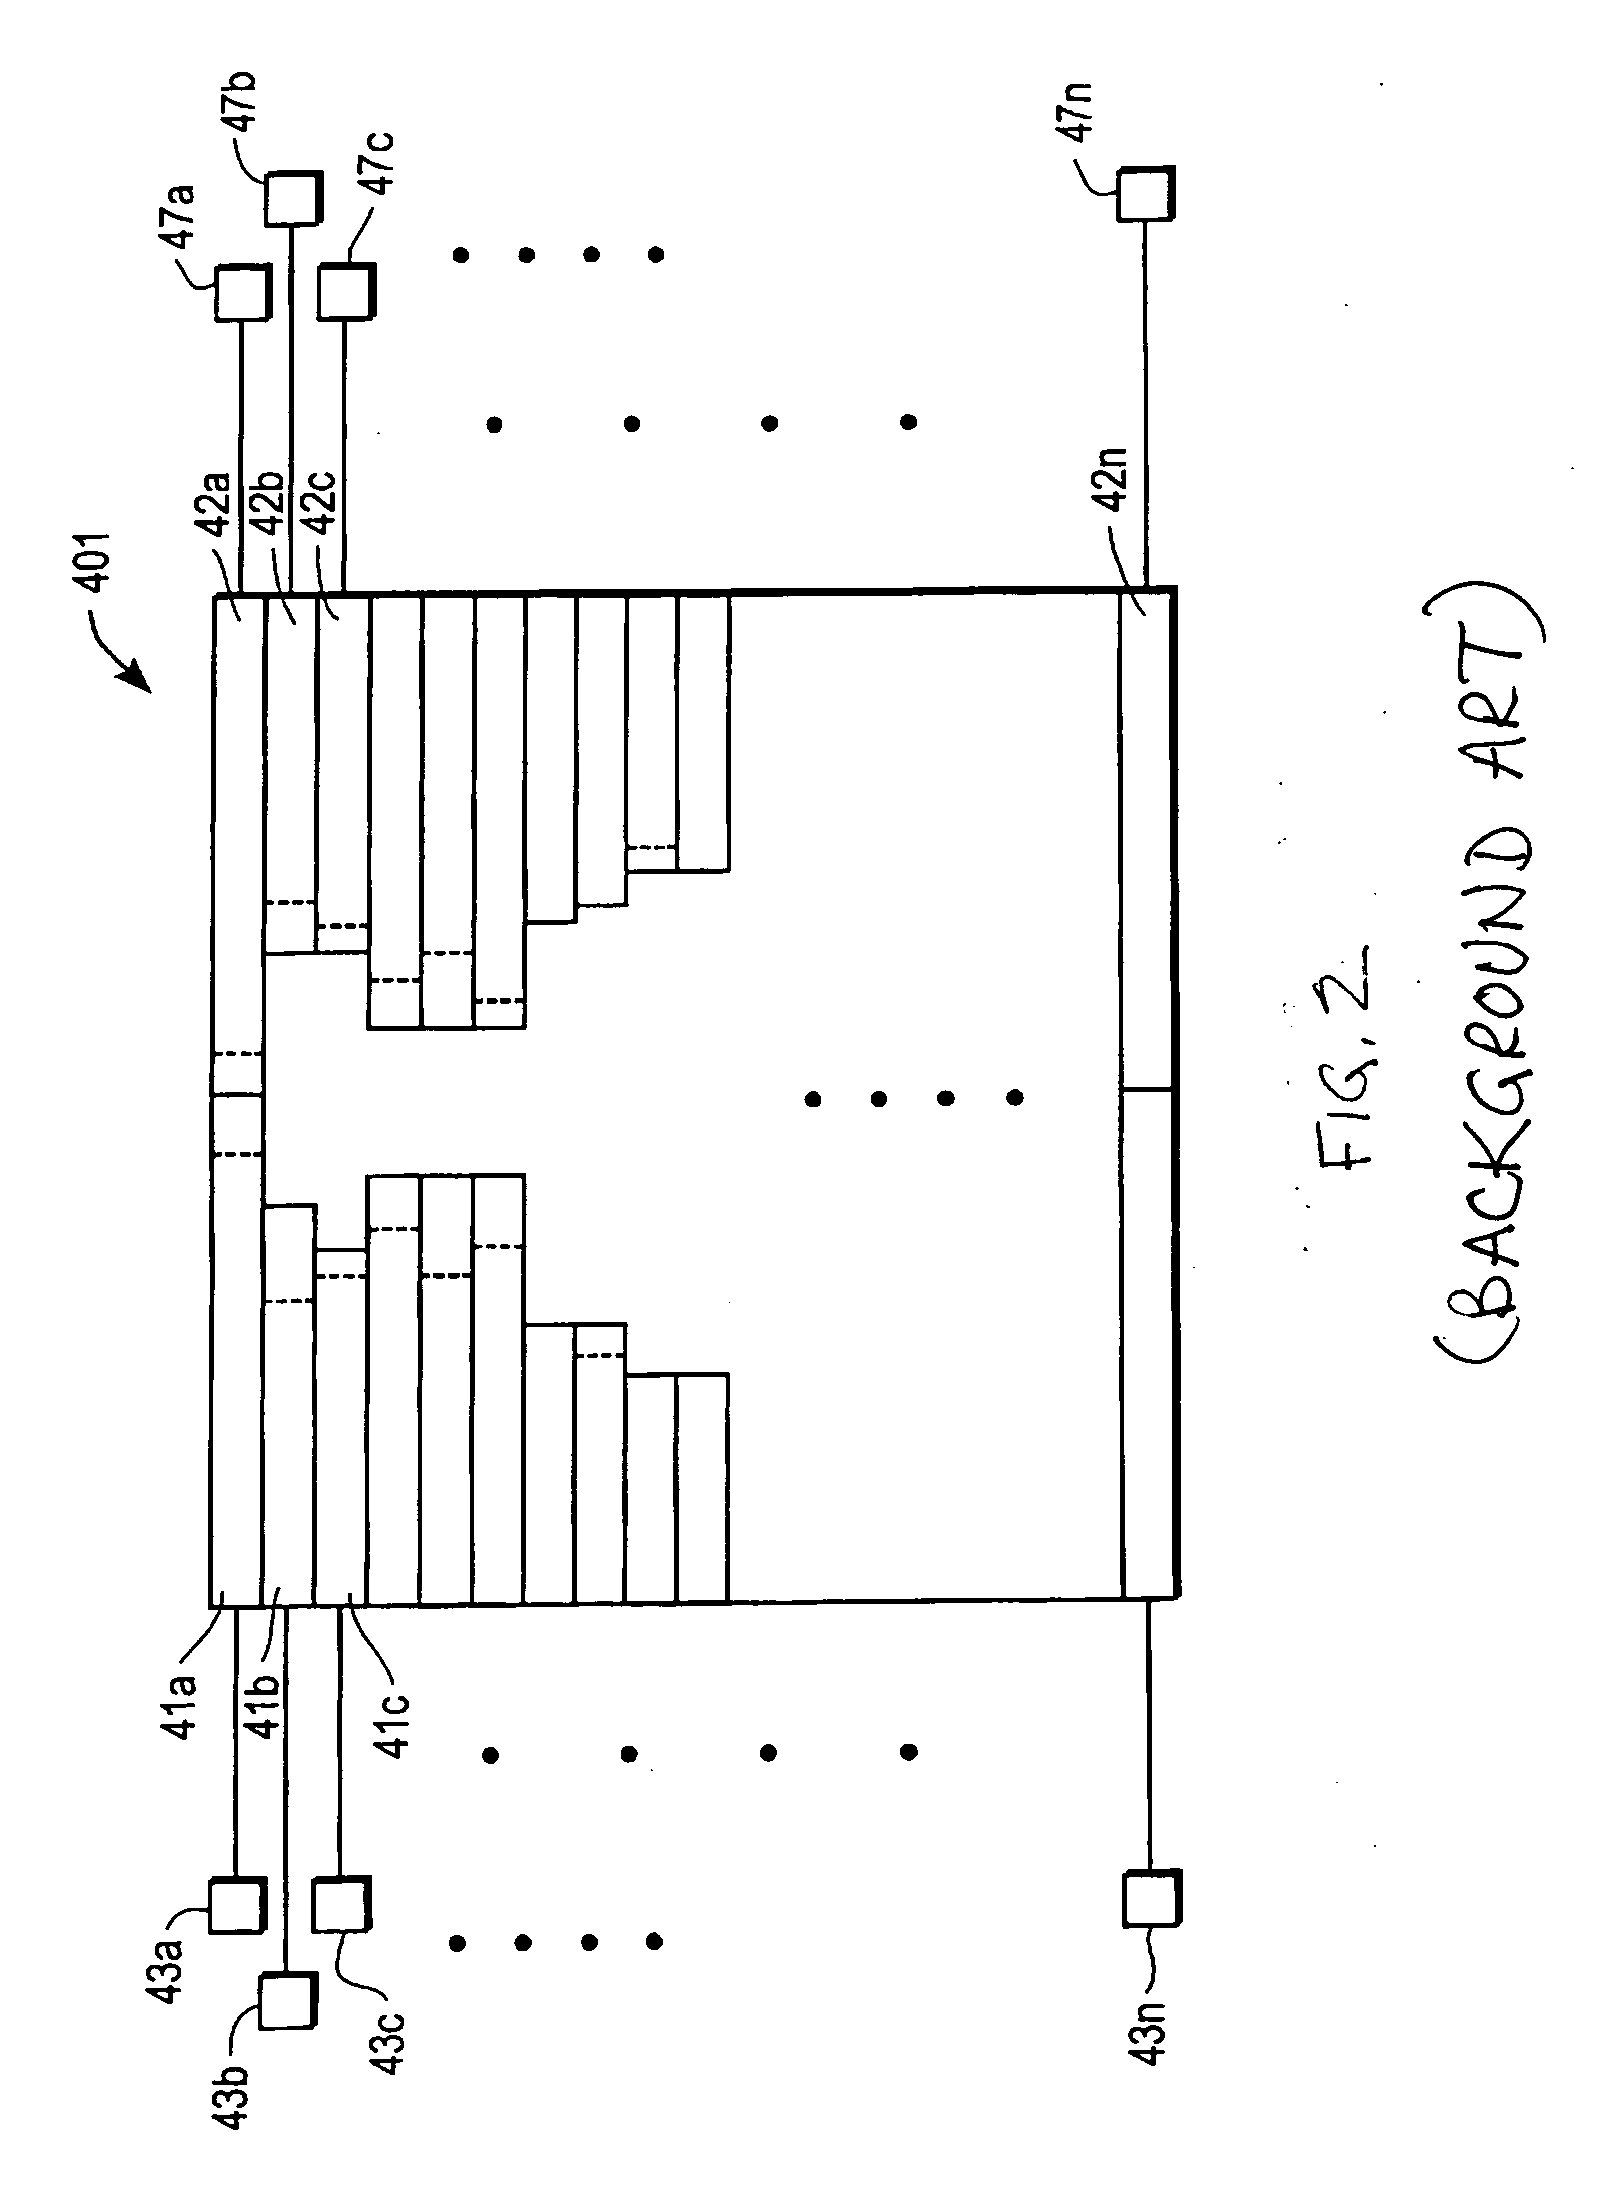 Method for intensity modulated radiation treatment using independent collimator jaws